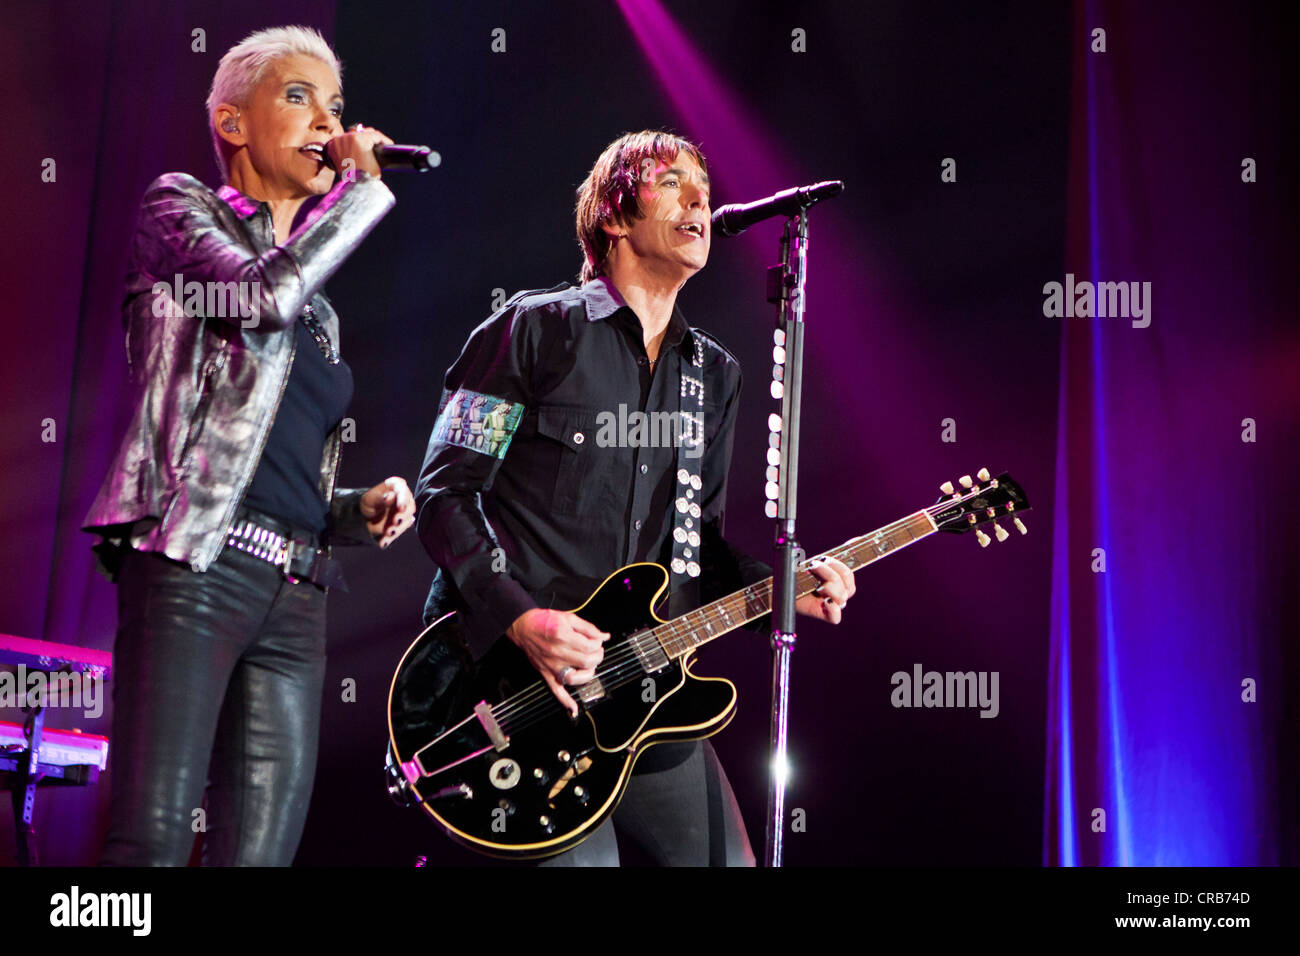 Swedish pop duo 'Roxette' with Marie Fredriksson and Per Gessle playing live at Hallenstadion in Zurich, Switzerland, Europe Stock Photo